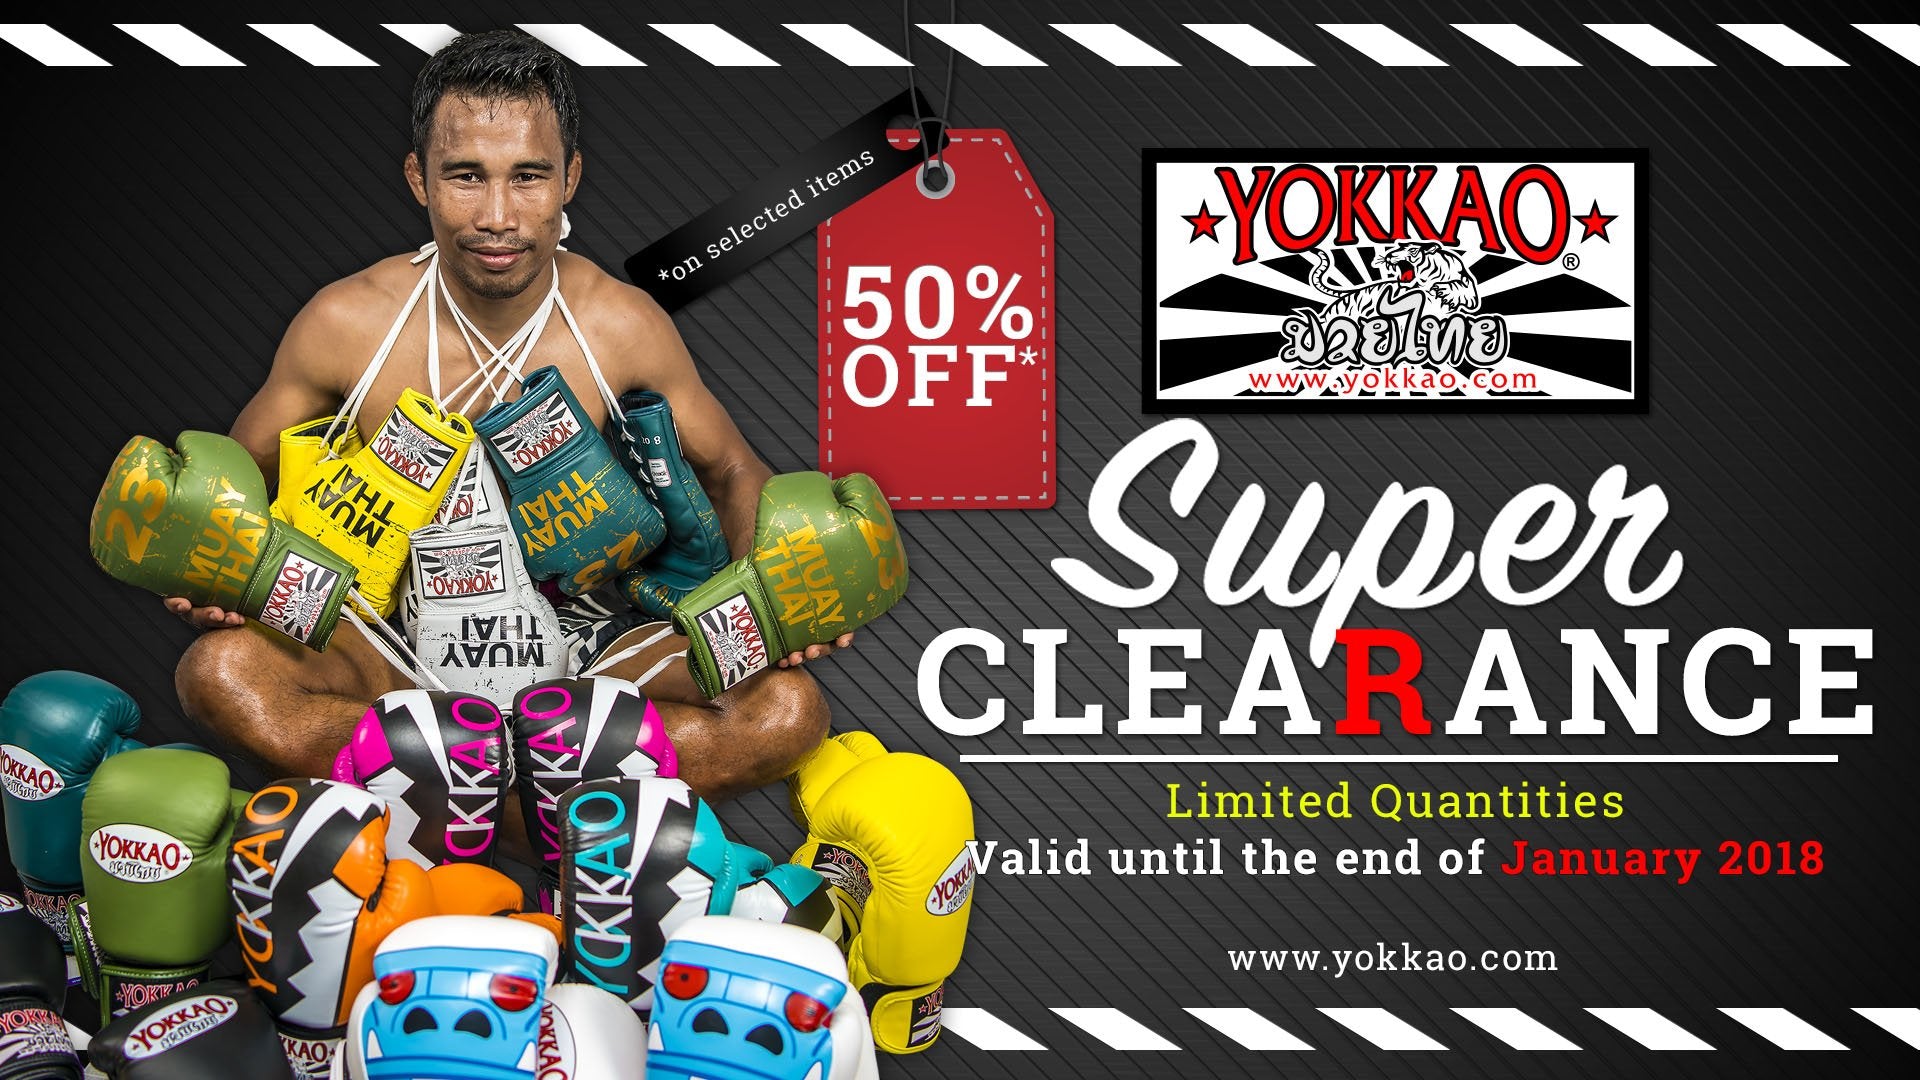 YOKKAO Super Clearance Sale - Amazing Deals at Unbeatable Prices!